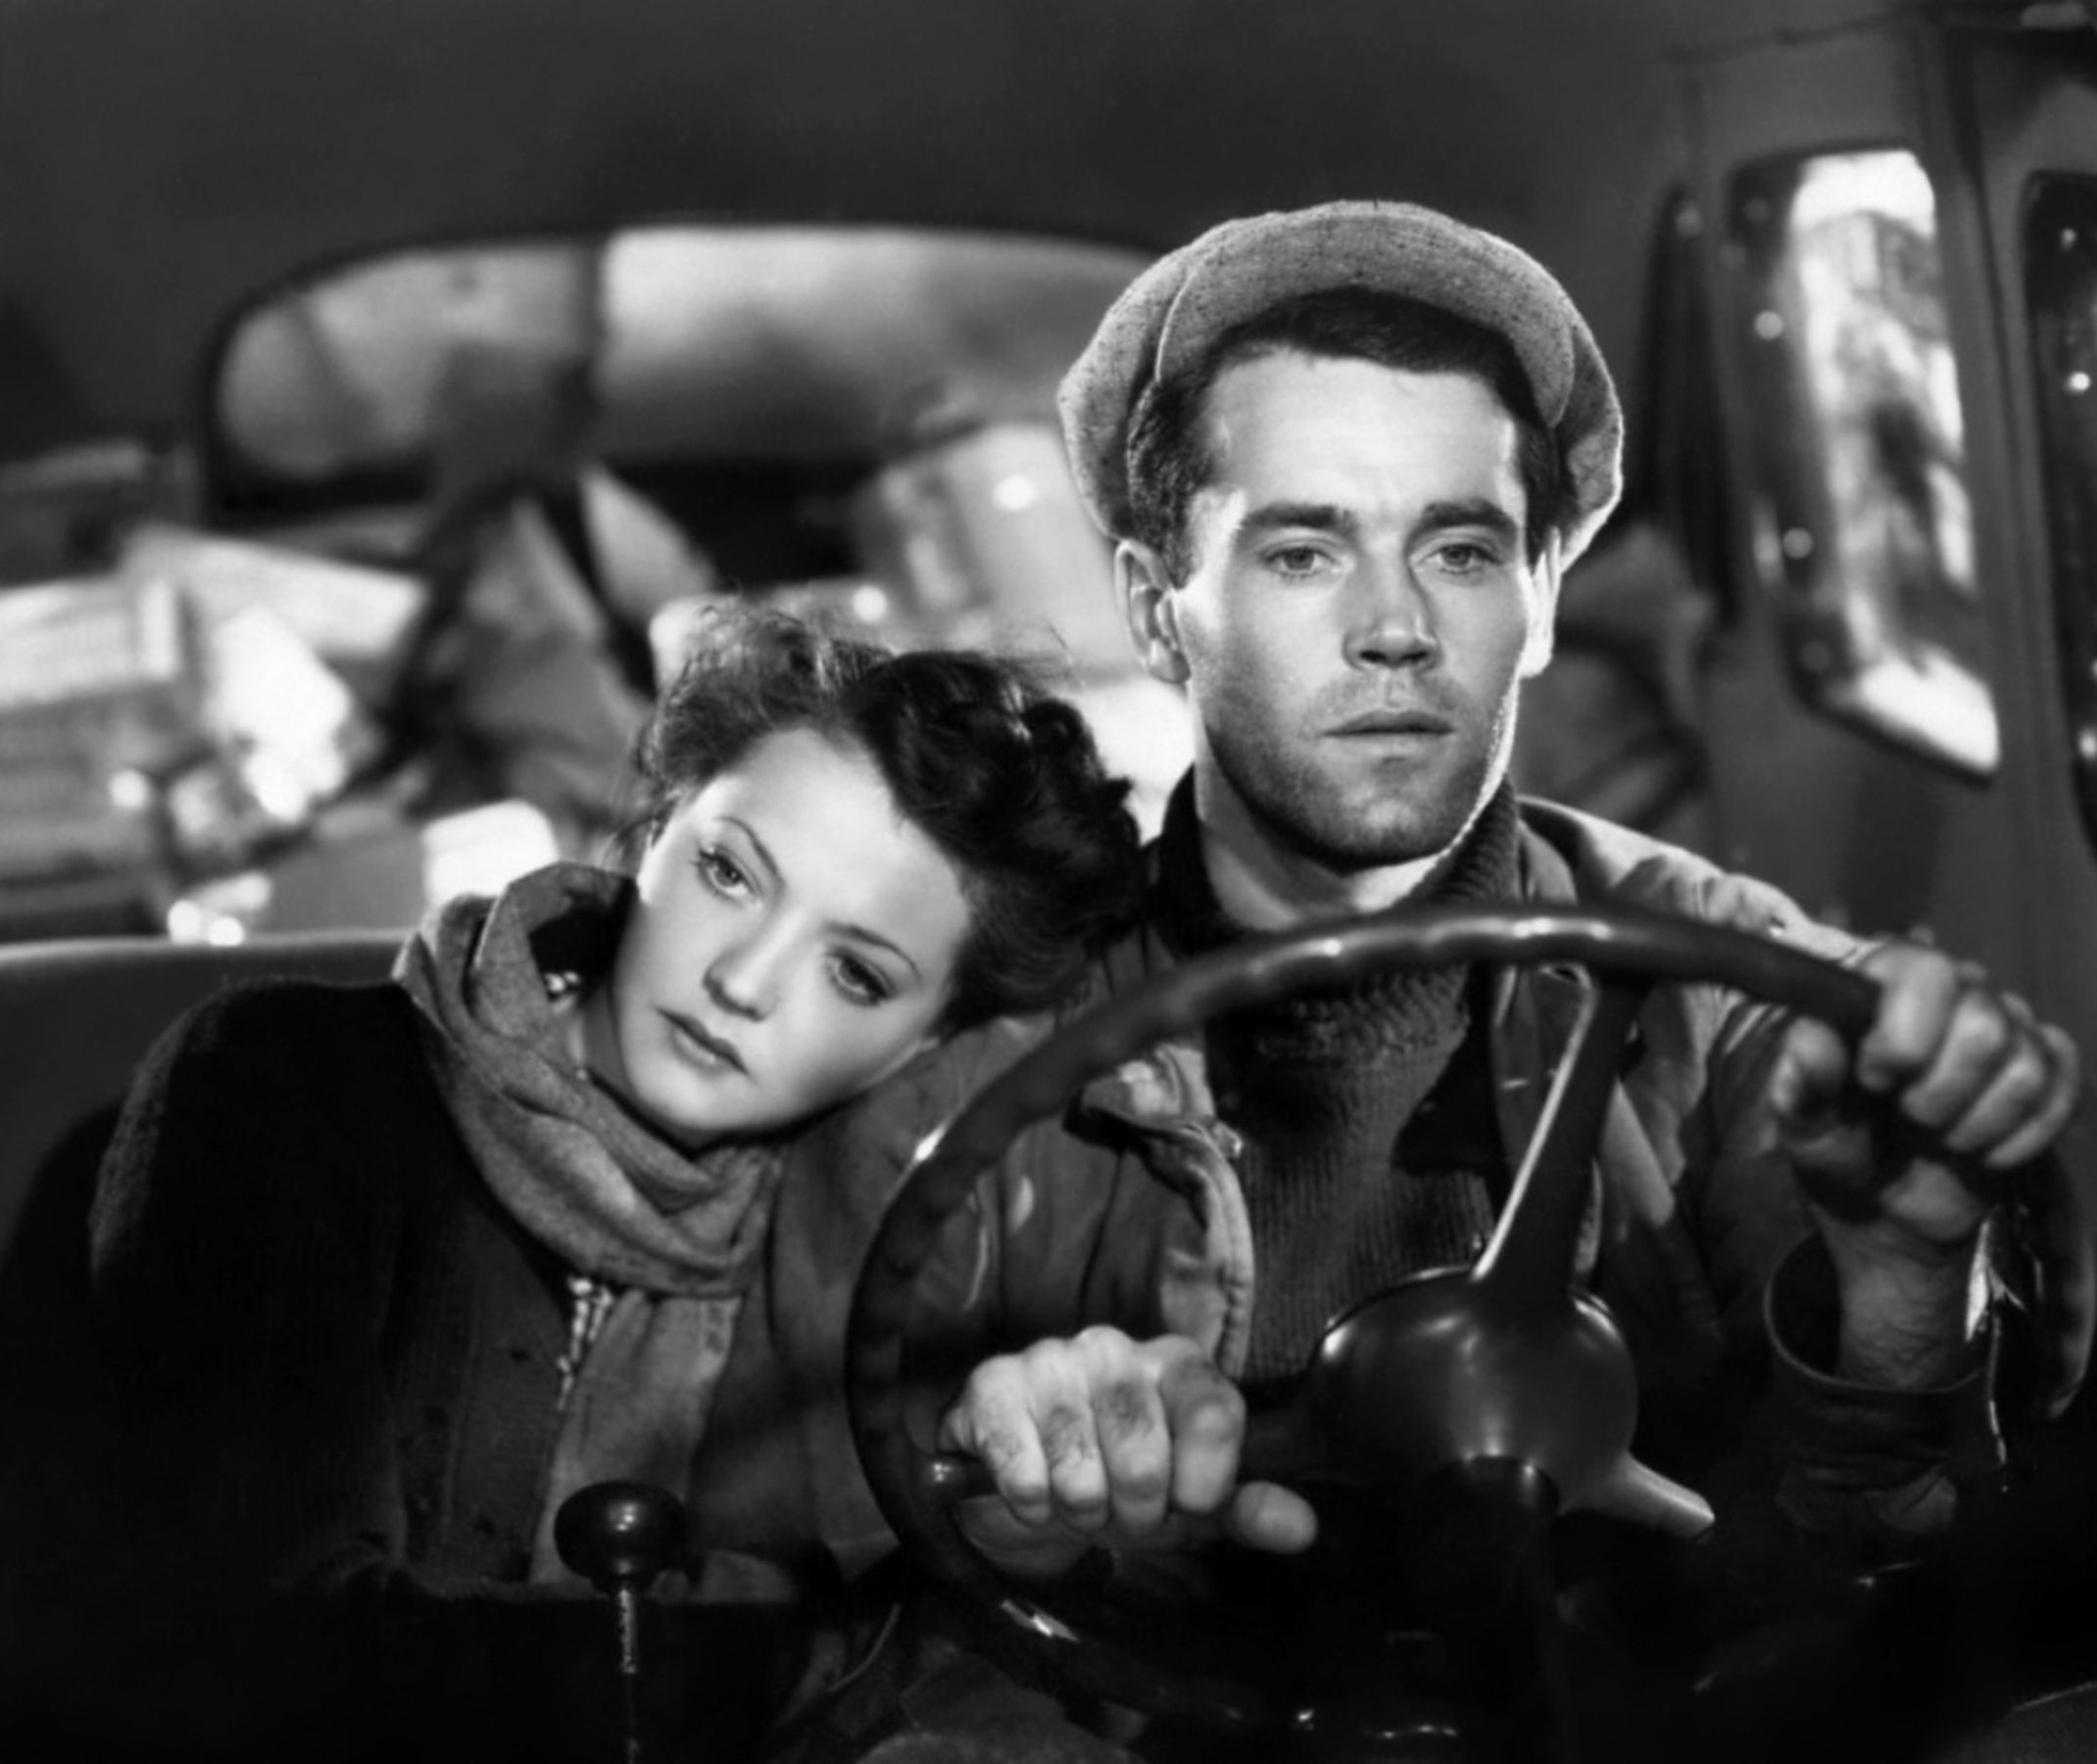 You Only Live Once (1937) still